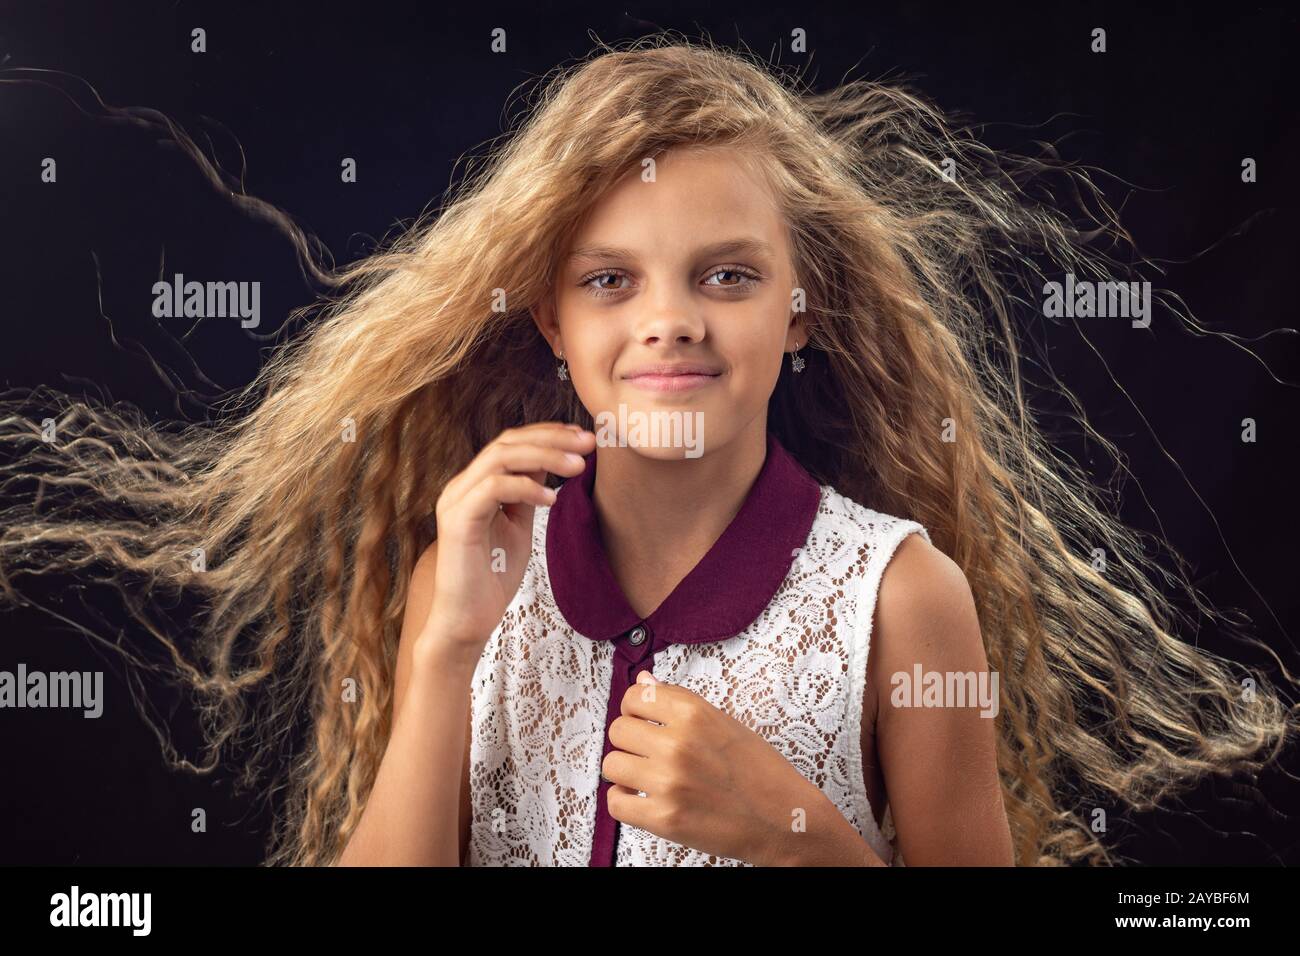 Portrait of a girl with developing hair Stock Photo